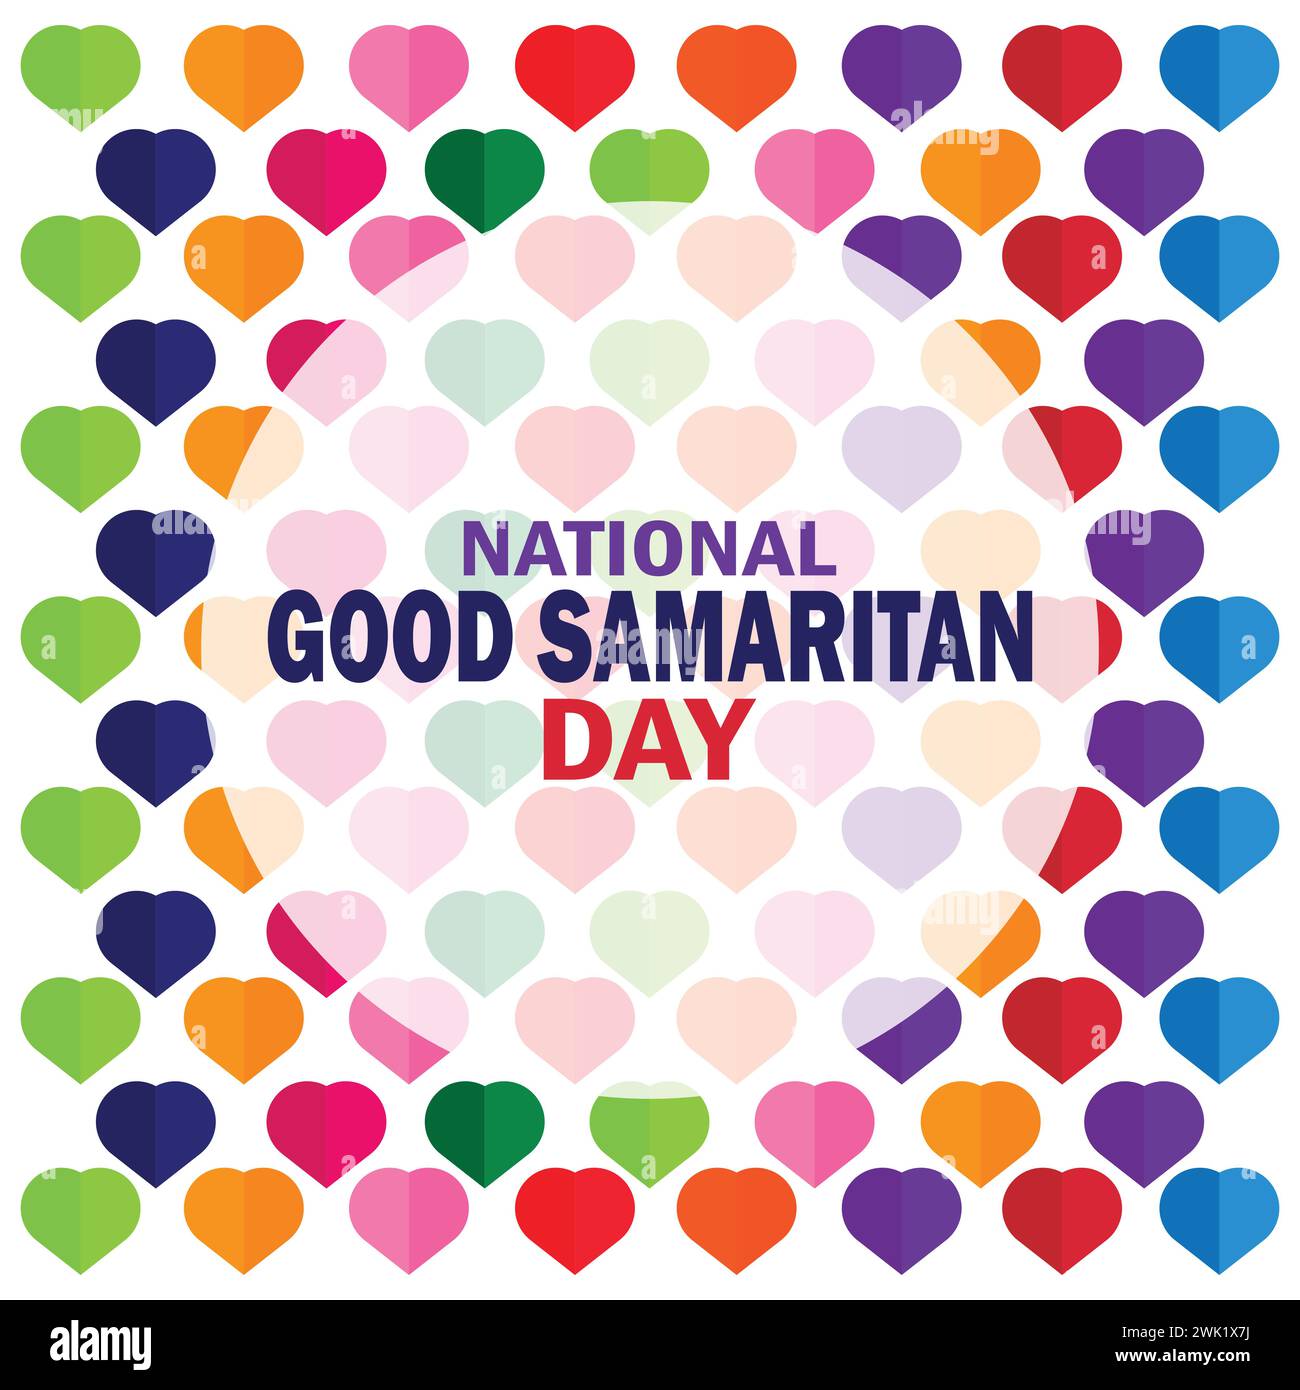 National Good Samaritan Day. Holiday concept. Template for background, banner, card, poster with text inscription. Stock Vector